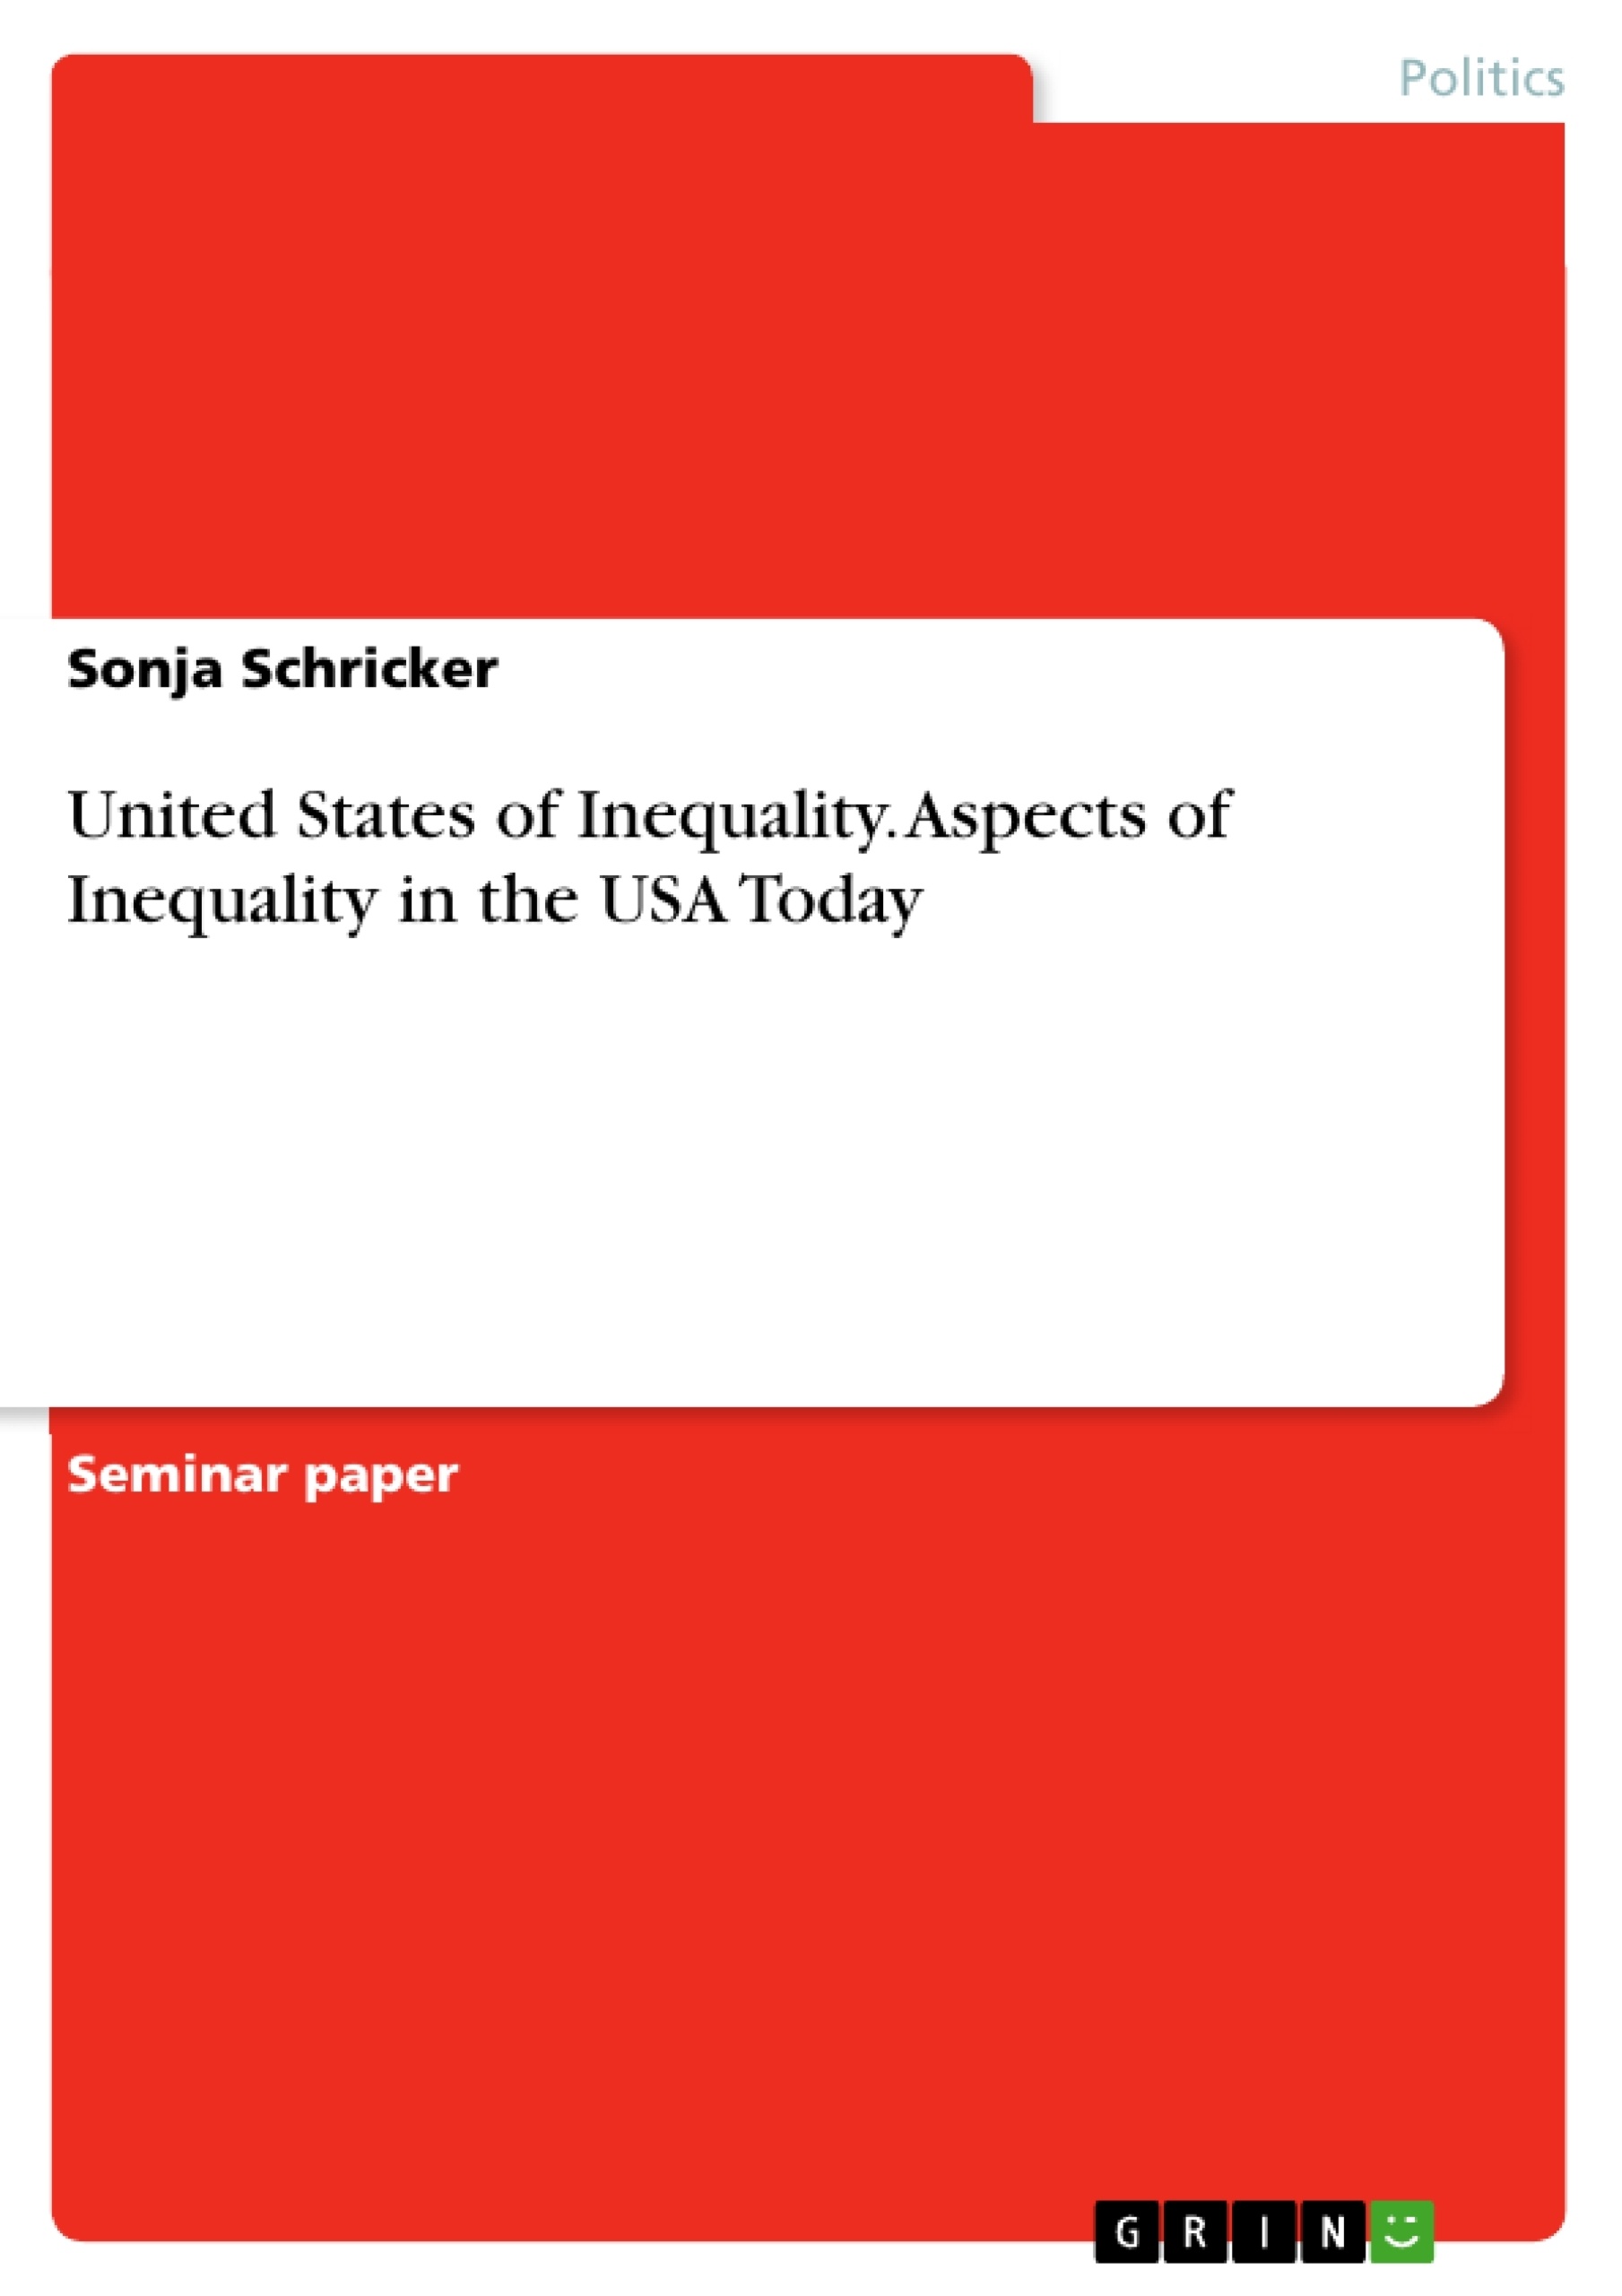 Título: United States of Inequality. Aspects of Inequality in the USA Today